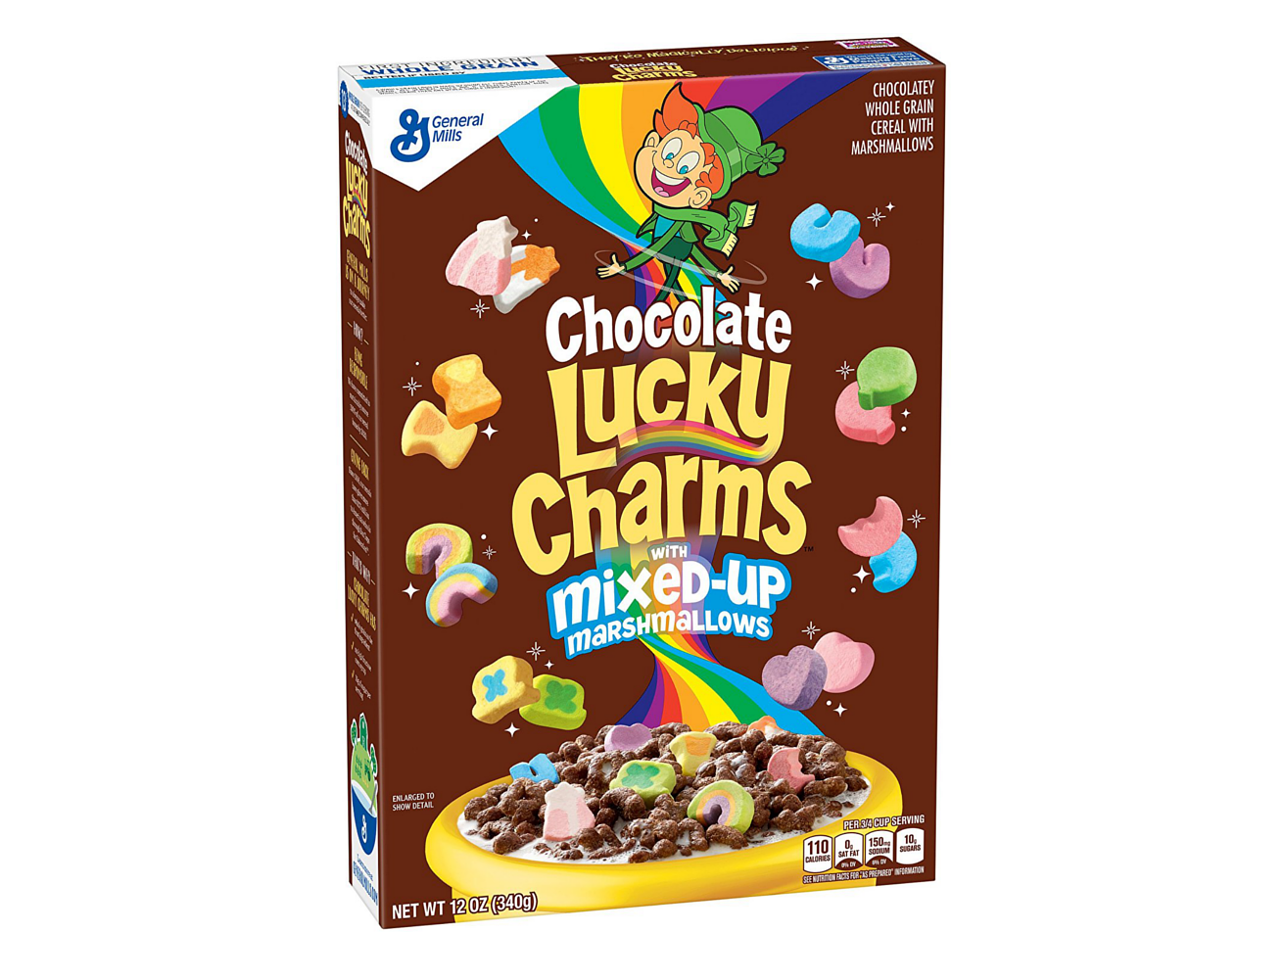 General Mills Lucky Charms Chocolate Cereal